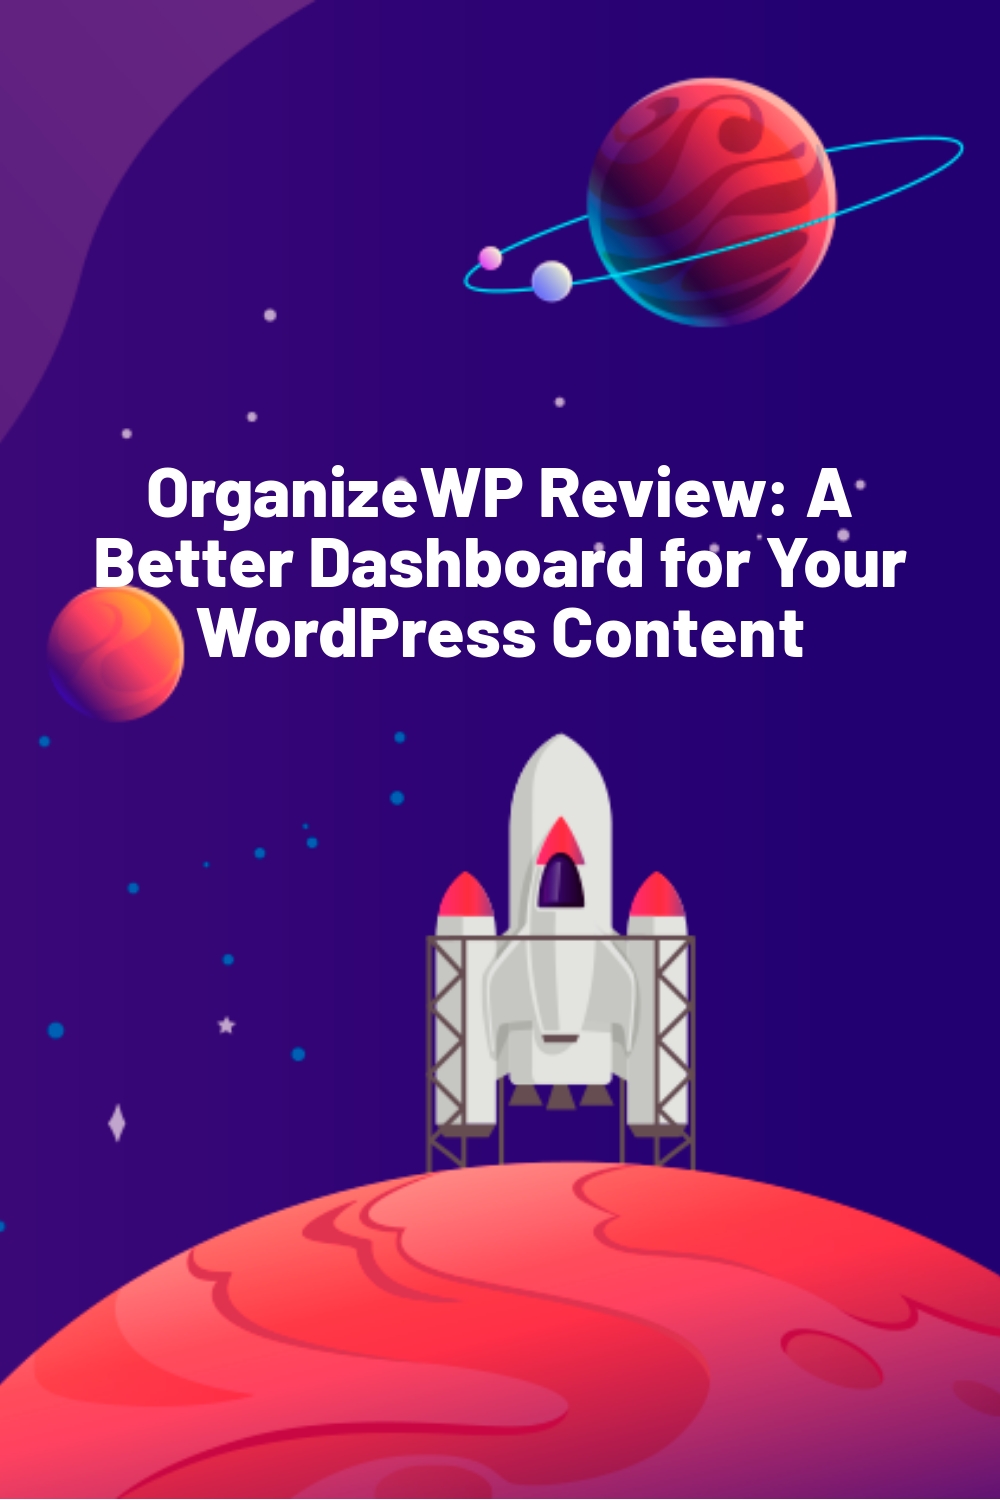 OrganizeWP Review: A Better Dashboard for Your WordPress Content